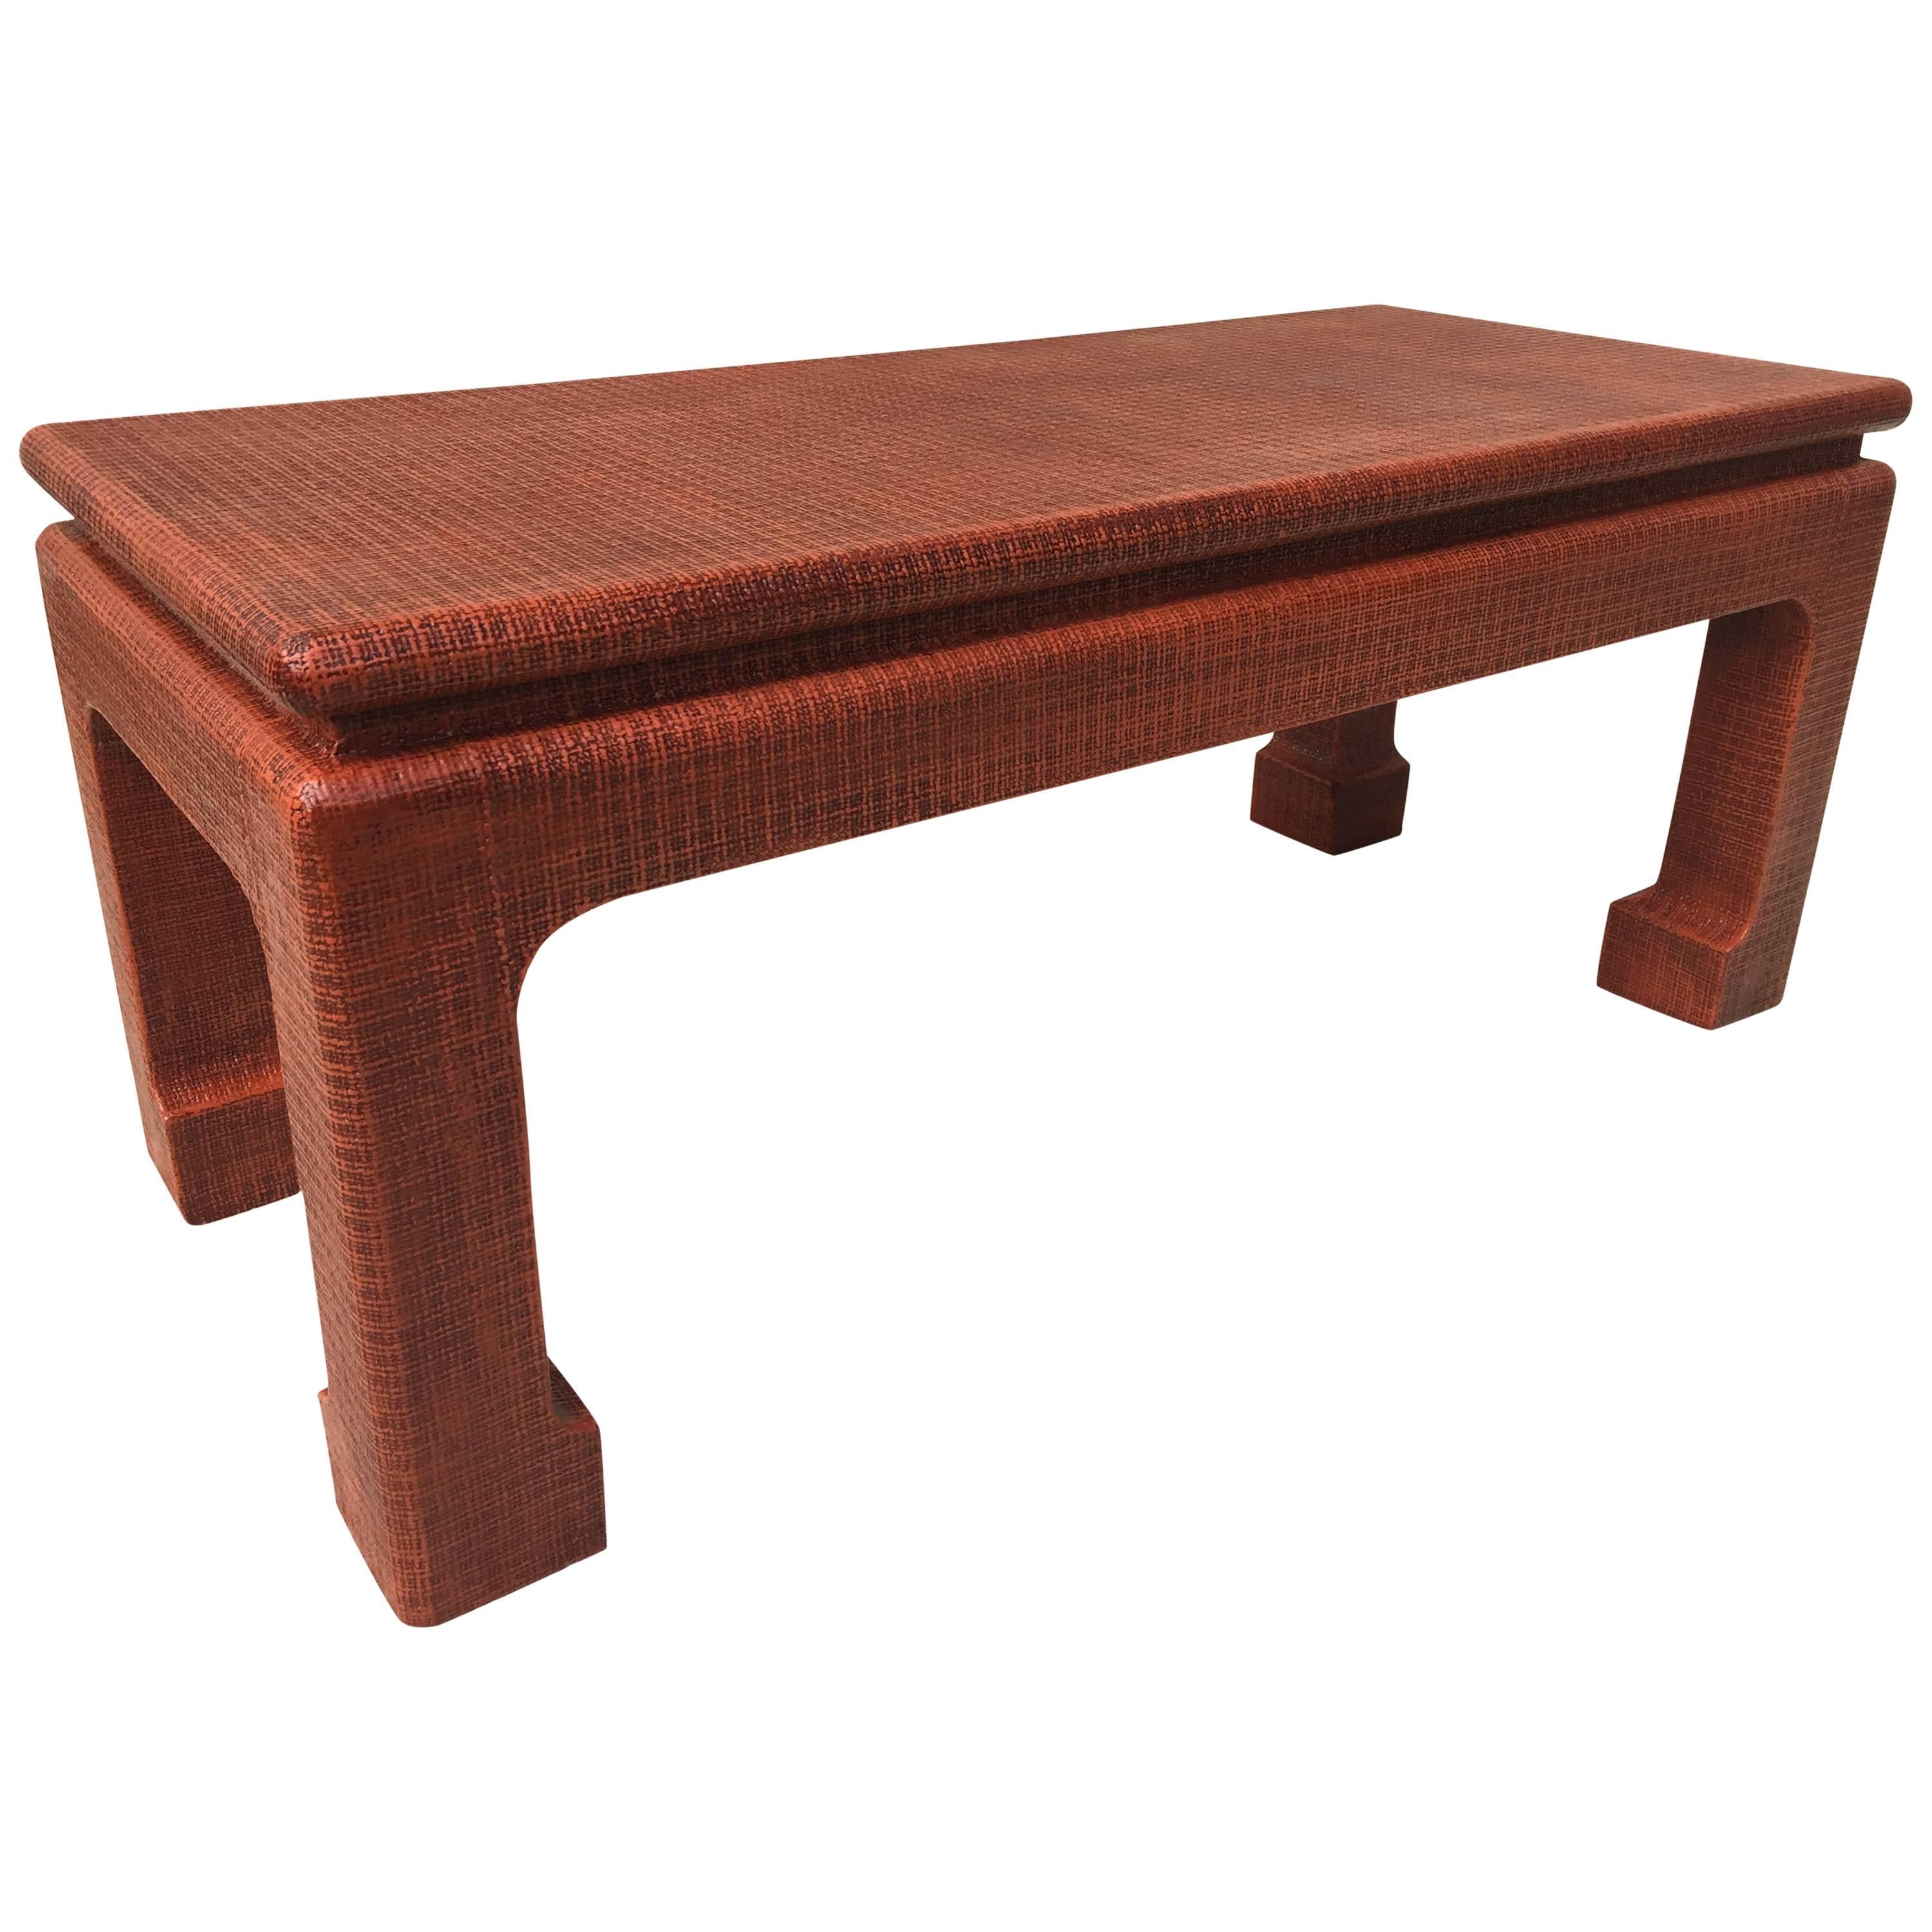 Karl Springer Style Grass Cloth Petite Table or Bench, Orange Lacquer